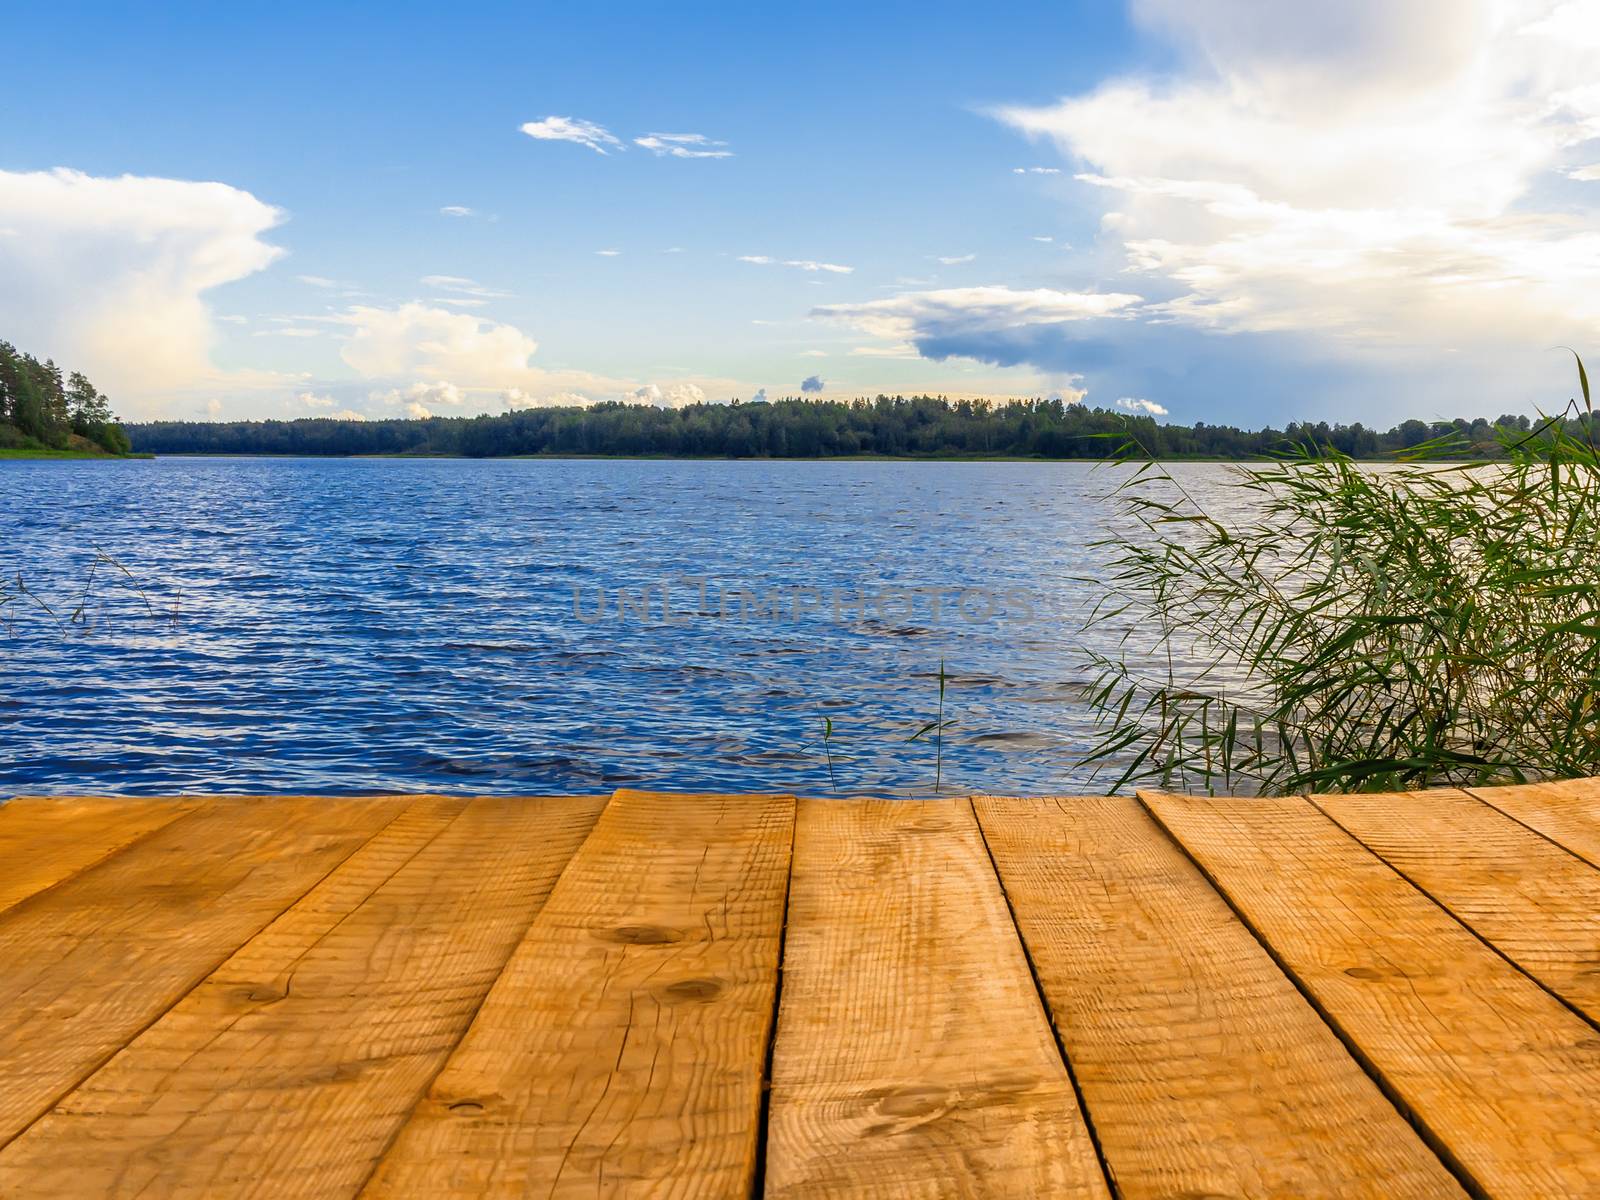 Empty wooden pier for swimming, boats or fishing on the lake.